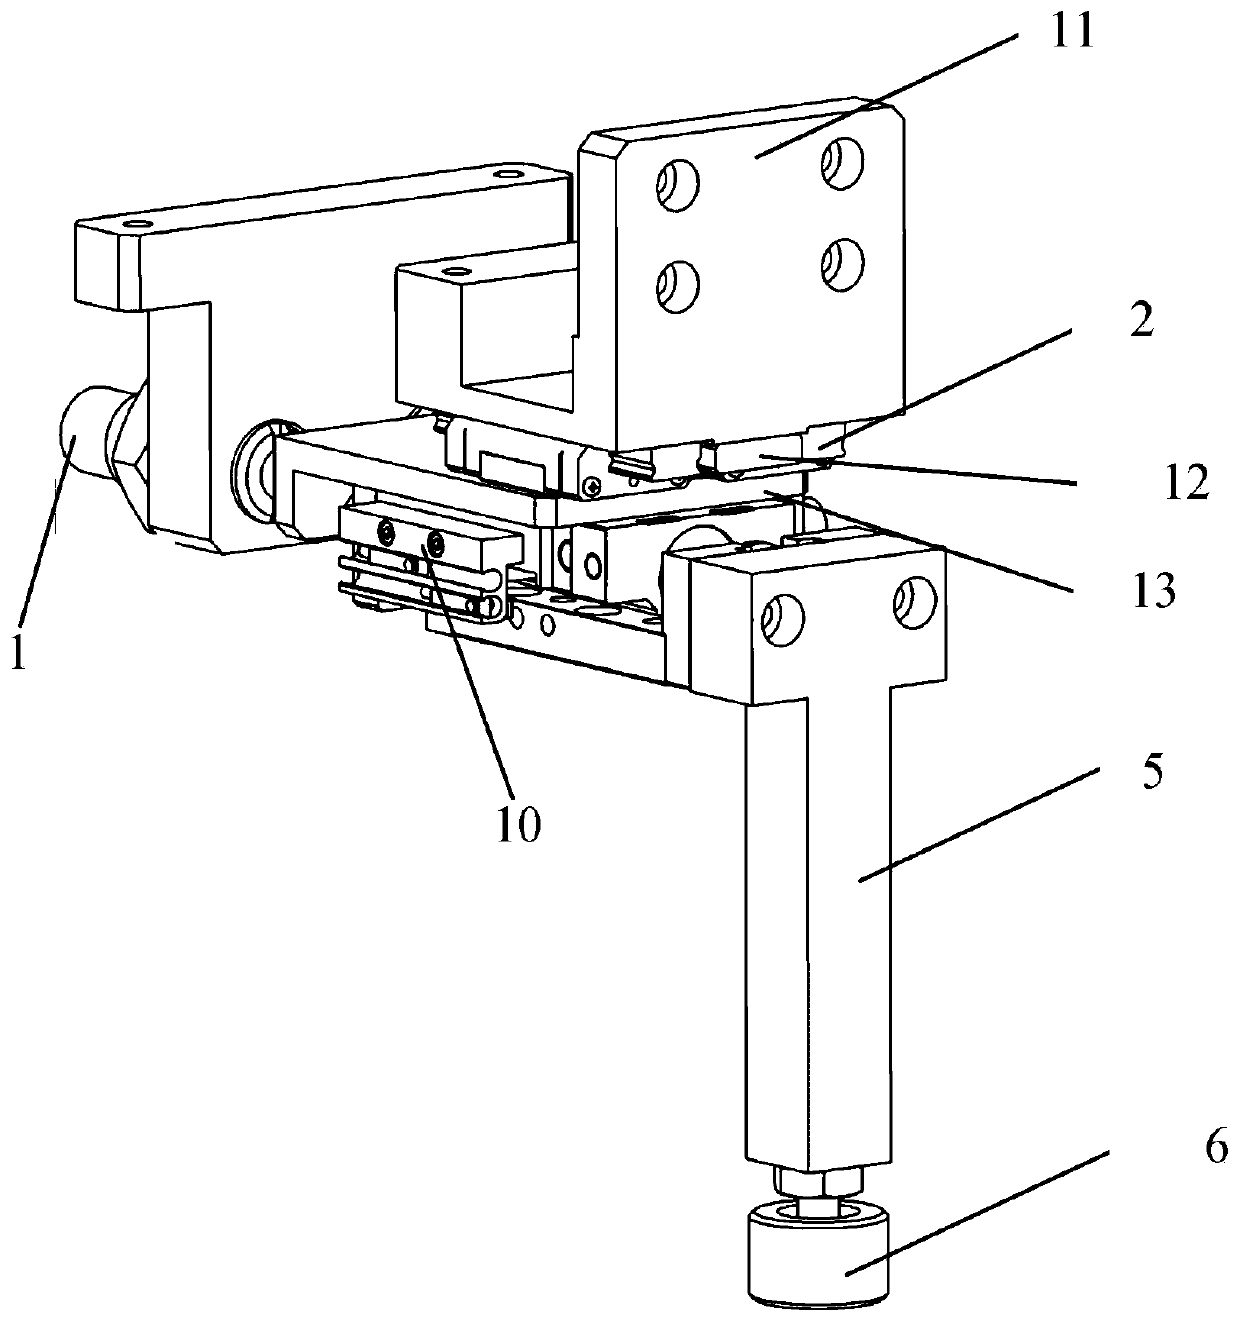 A reticle y-direction positioning device and method and a reticle transfer system